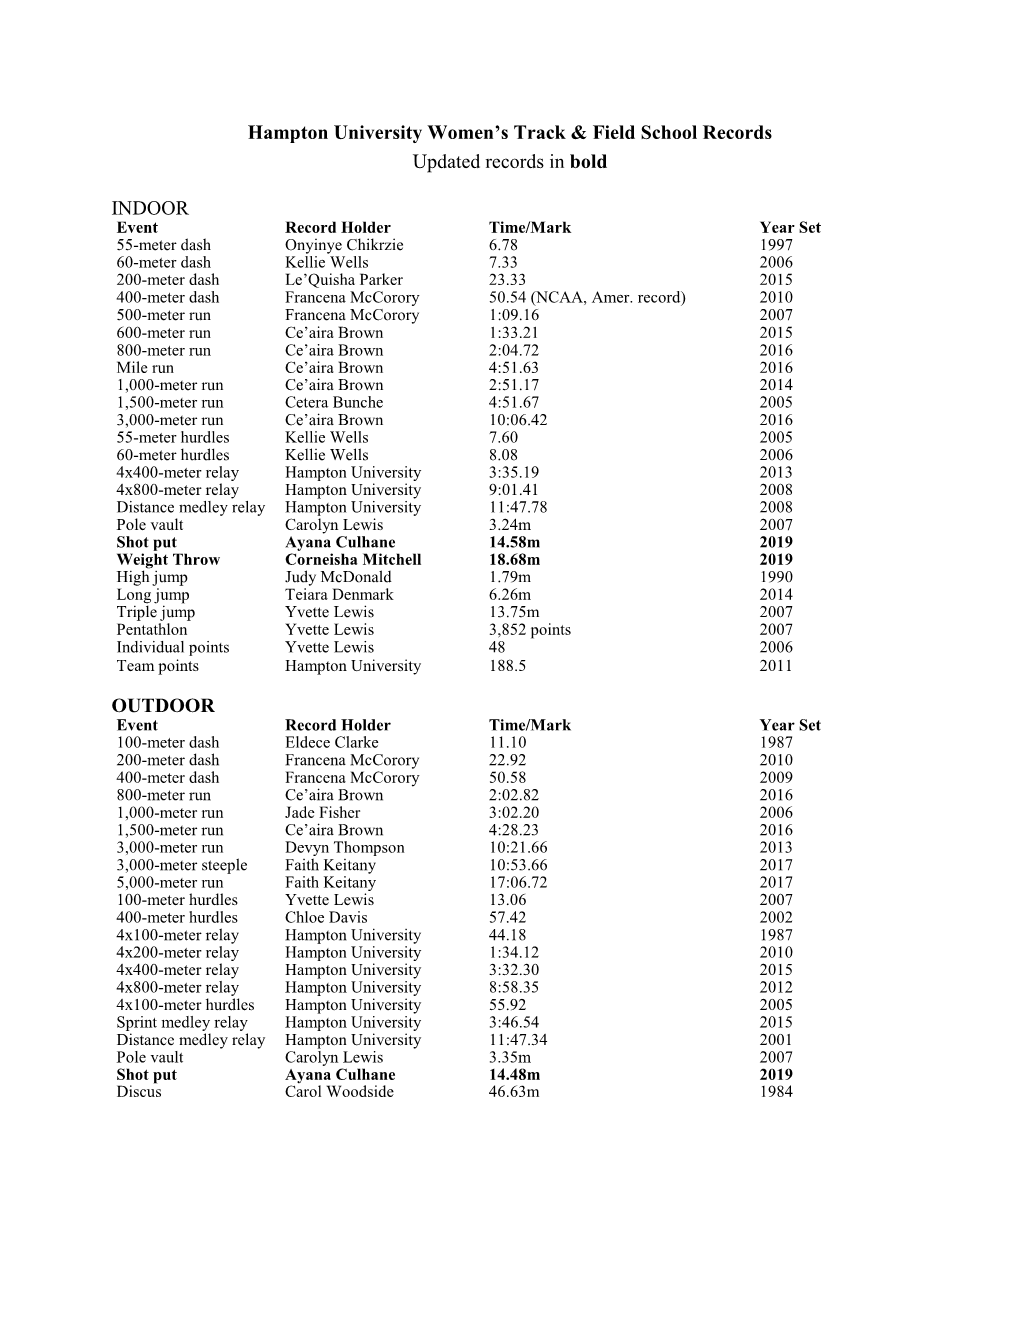 School Records Updated Records in Bold